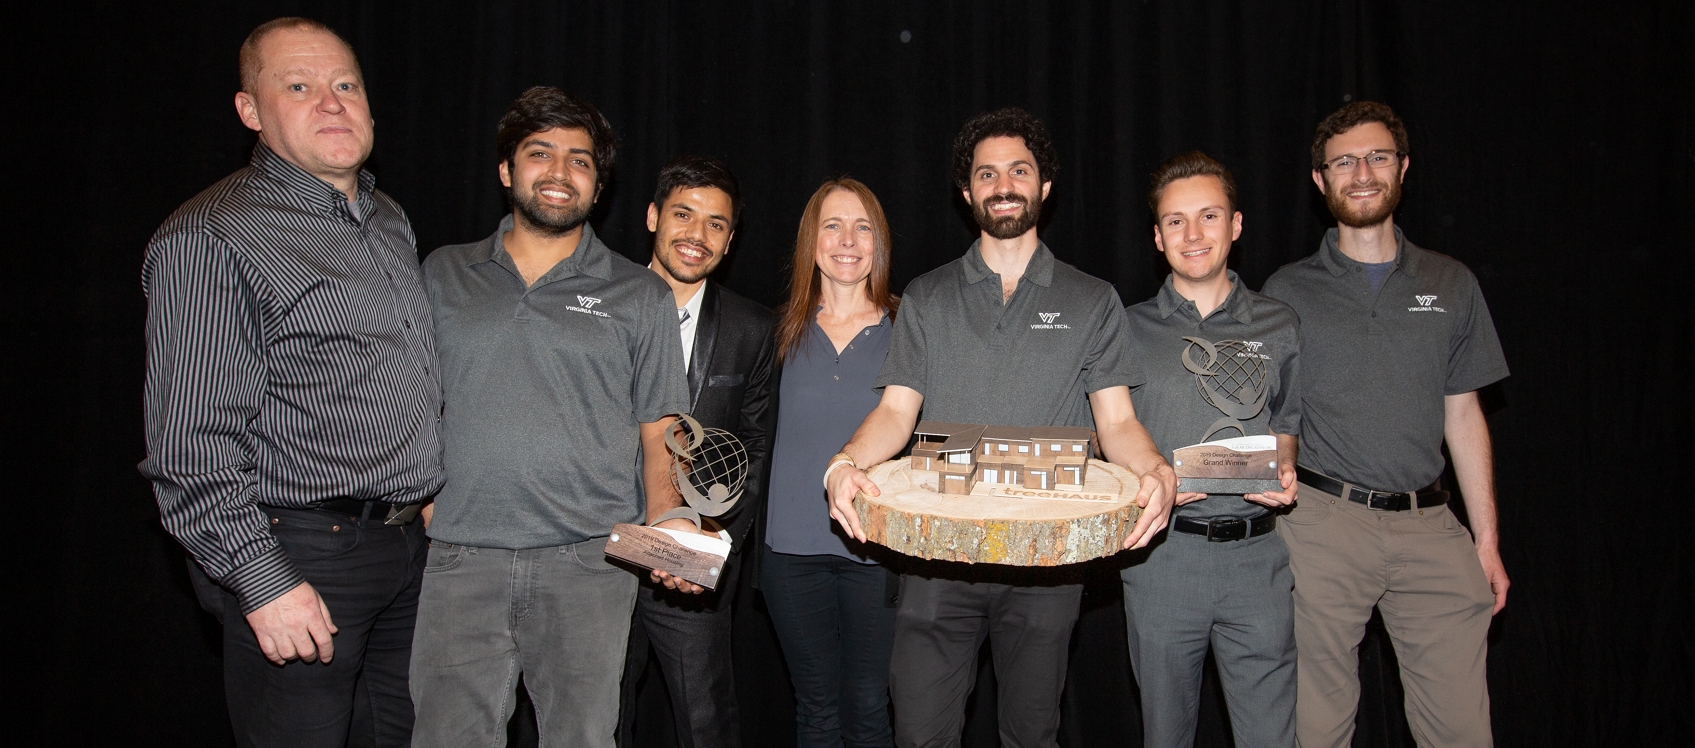 Photo of the winners of the 2019 Design Challenge. There are seven individuals posing with two trophies and a model of their winning design.